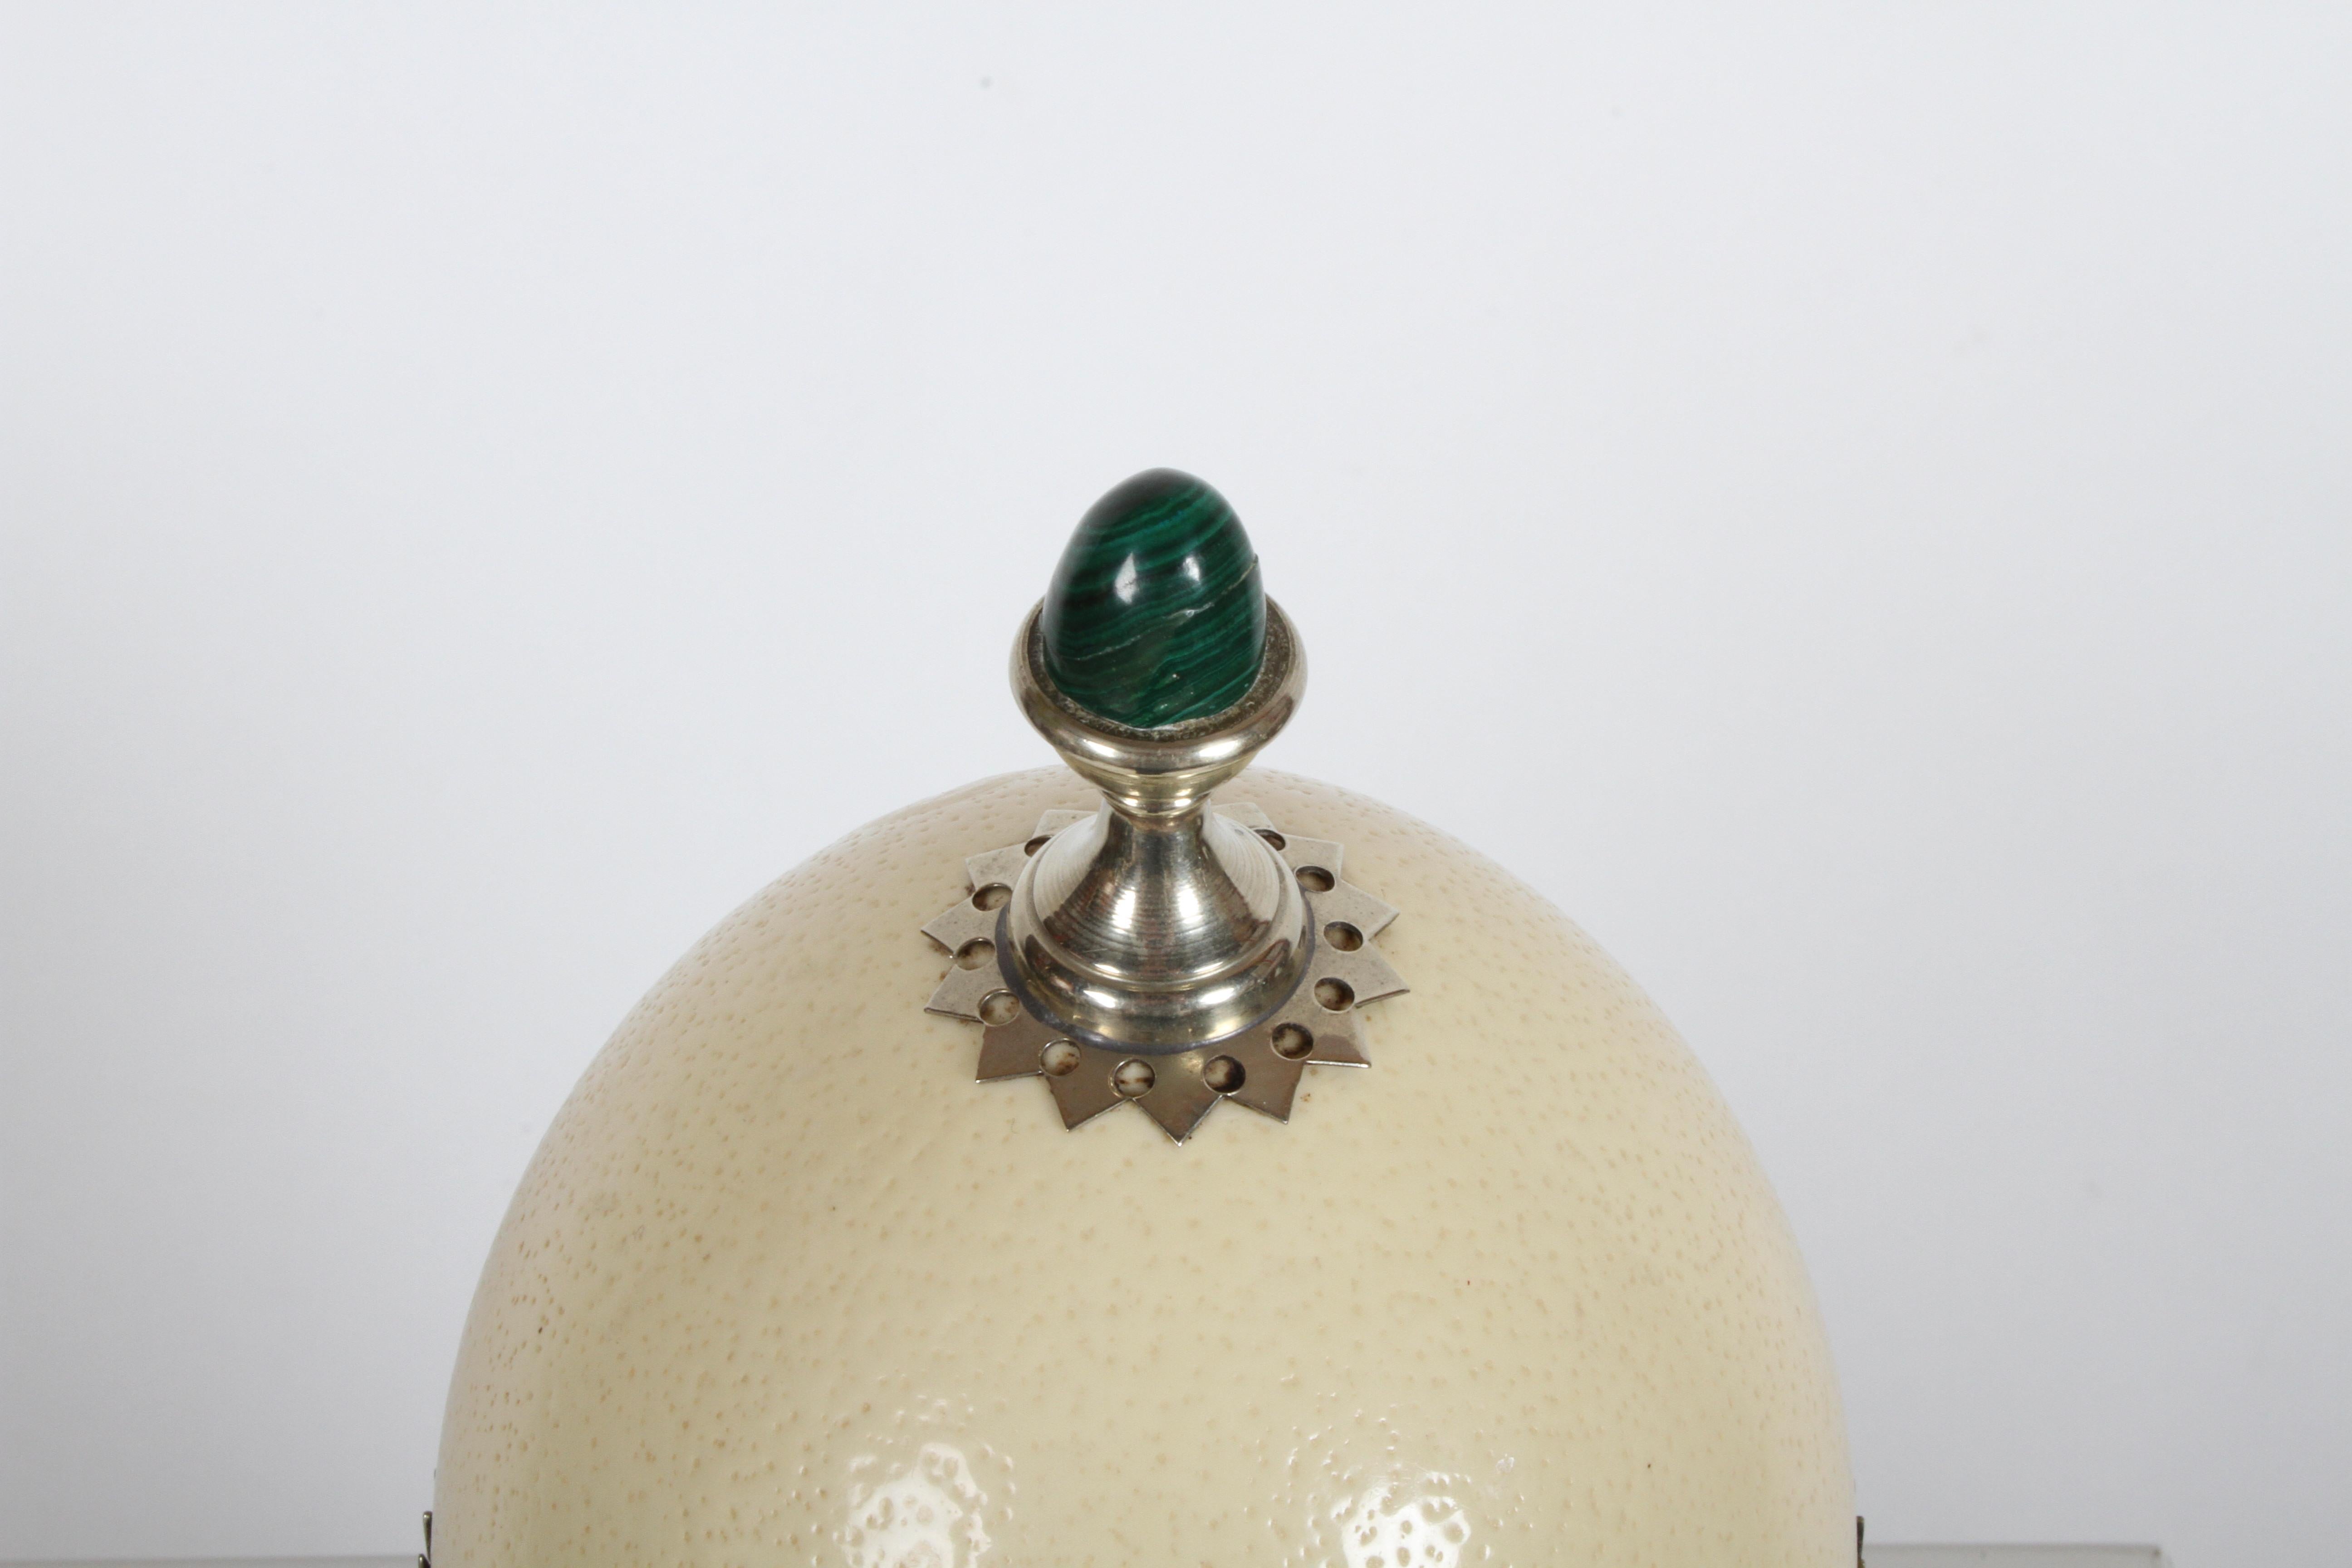 Hollywood Regency J. Antony Redmile London Ostrich Egg w/ Malachite Finial Silver Plated Box 1970s For Sale